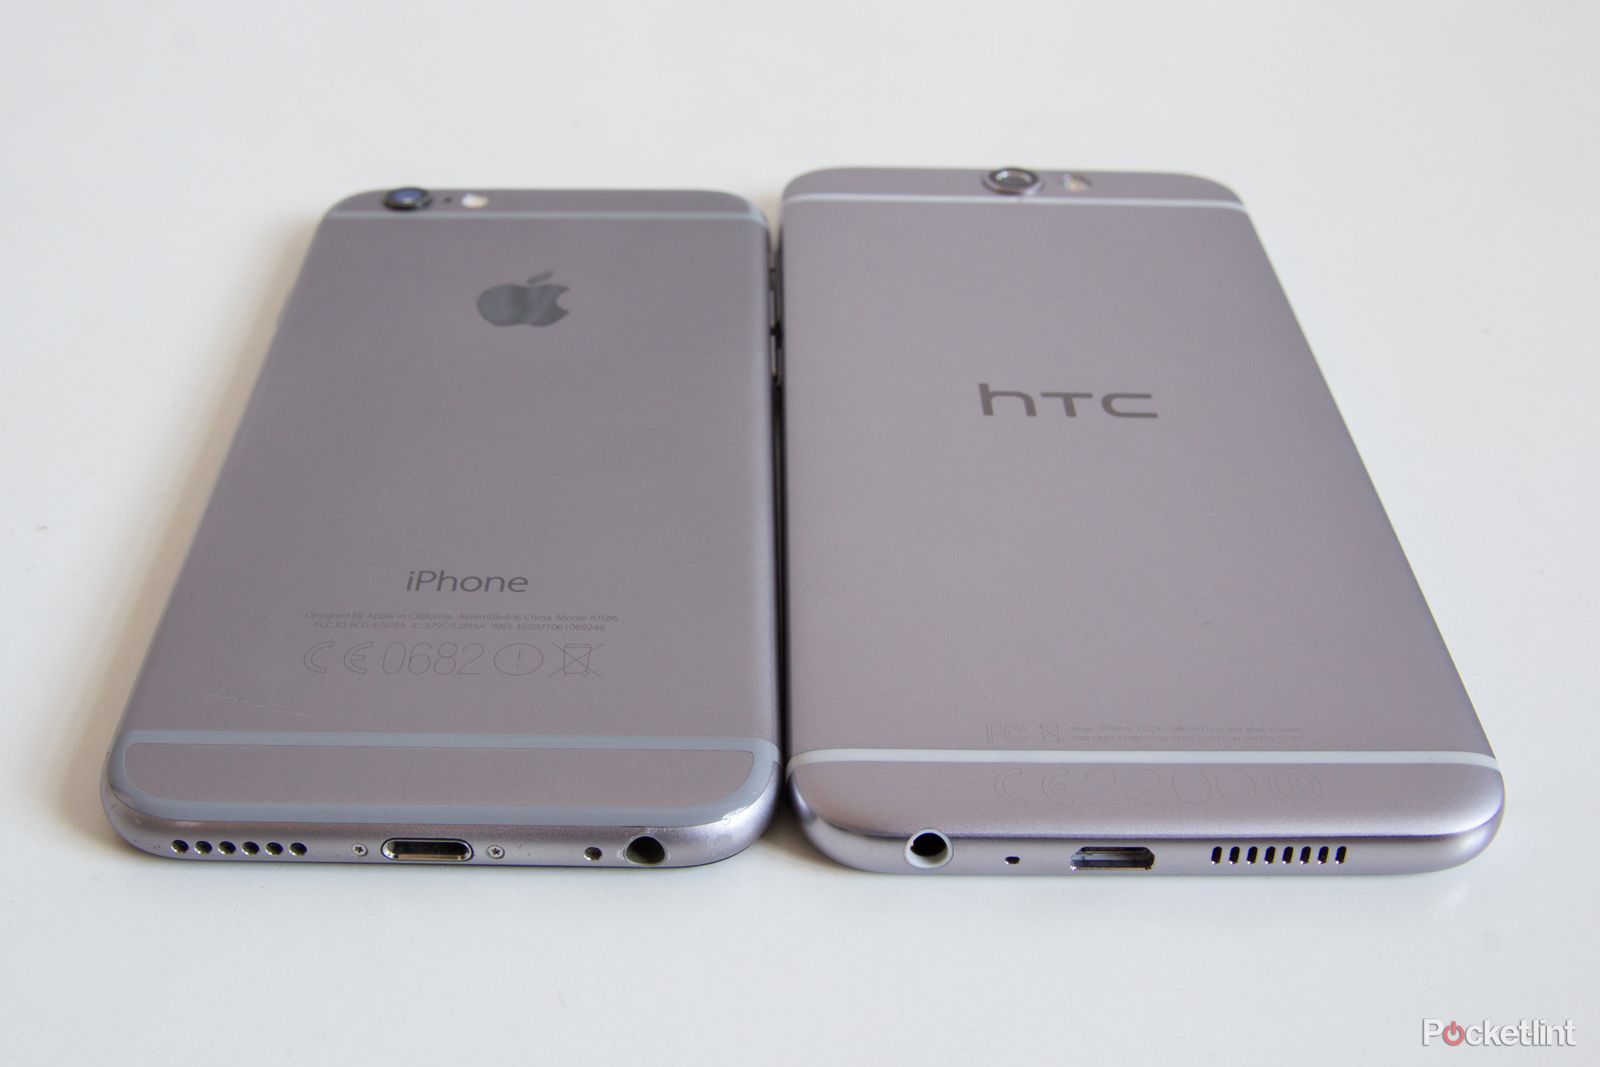 htc one a9 did htc just copy the iphone 6 design image 5